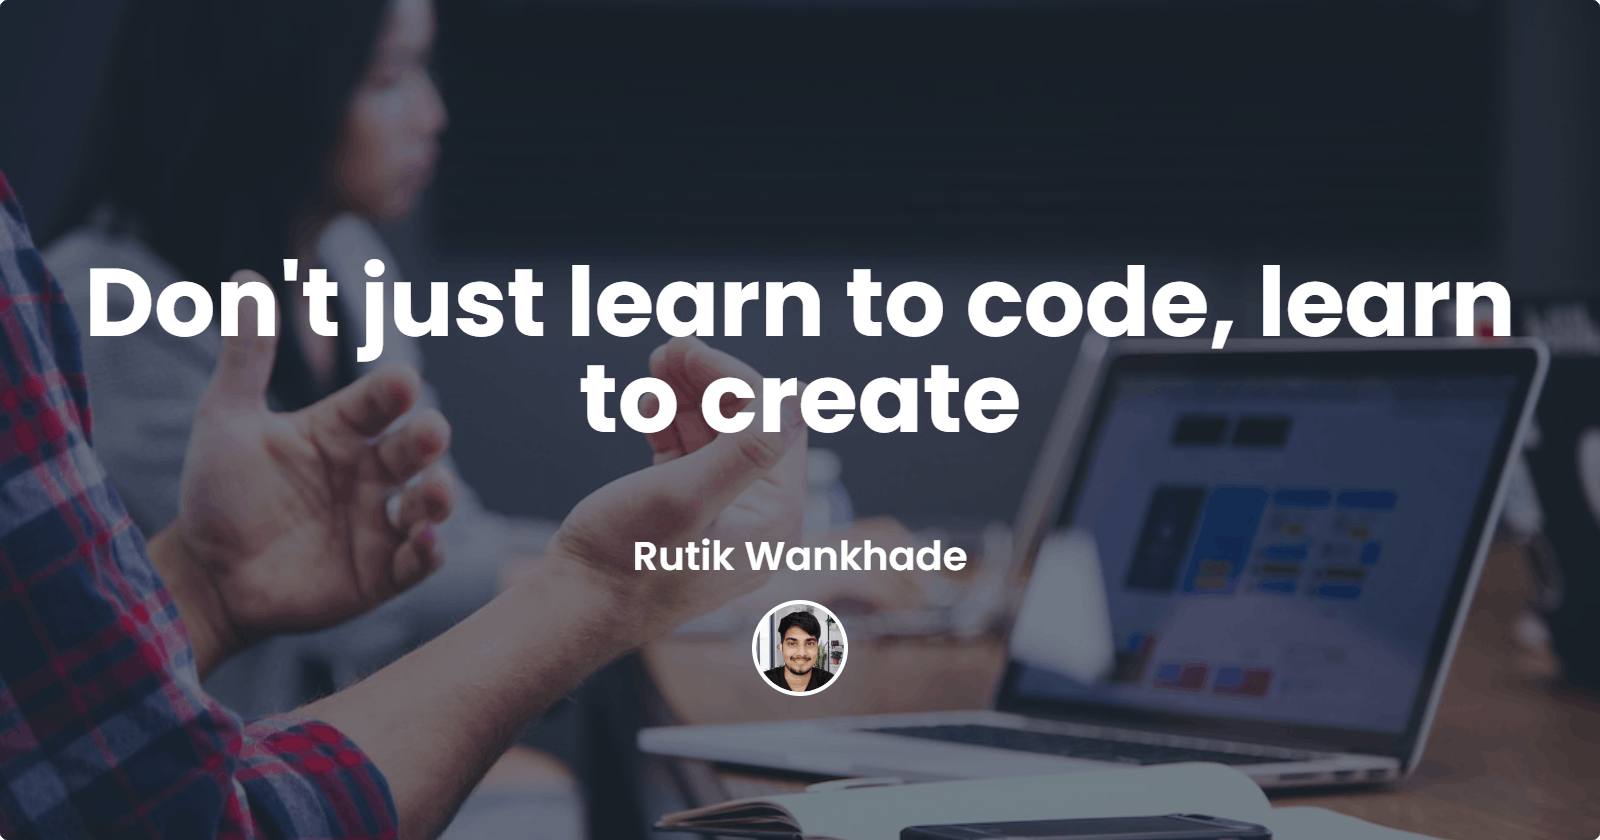 Don't just learn to code, learn to create